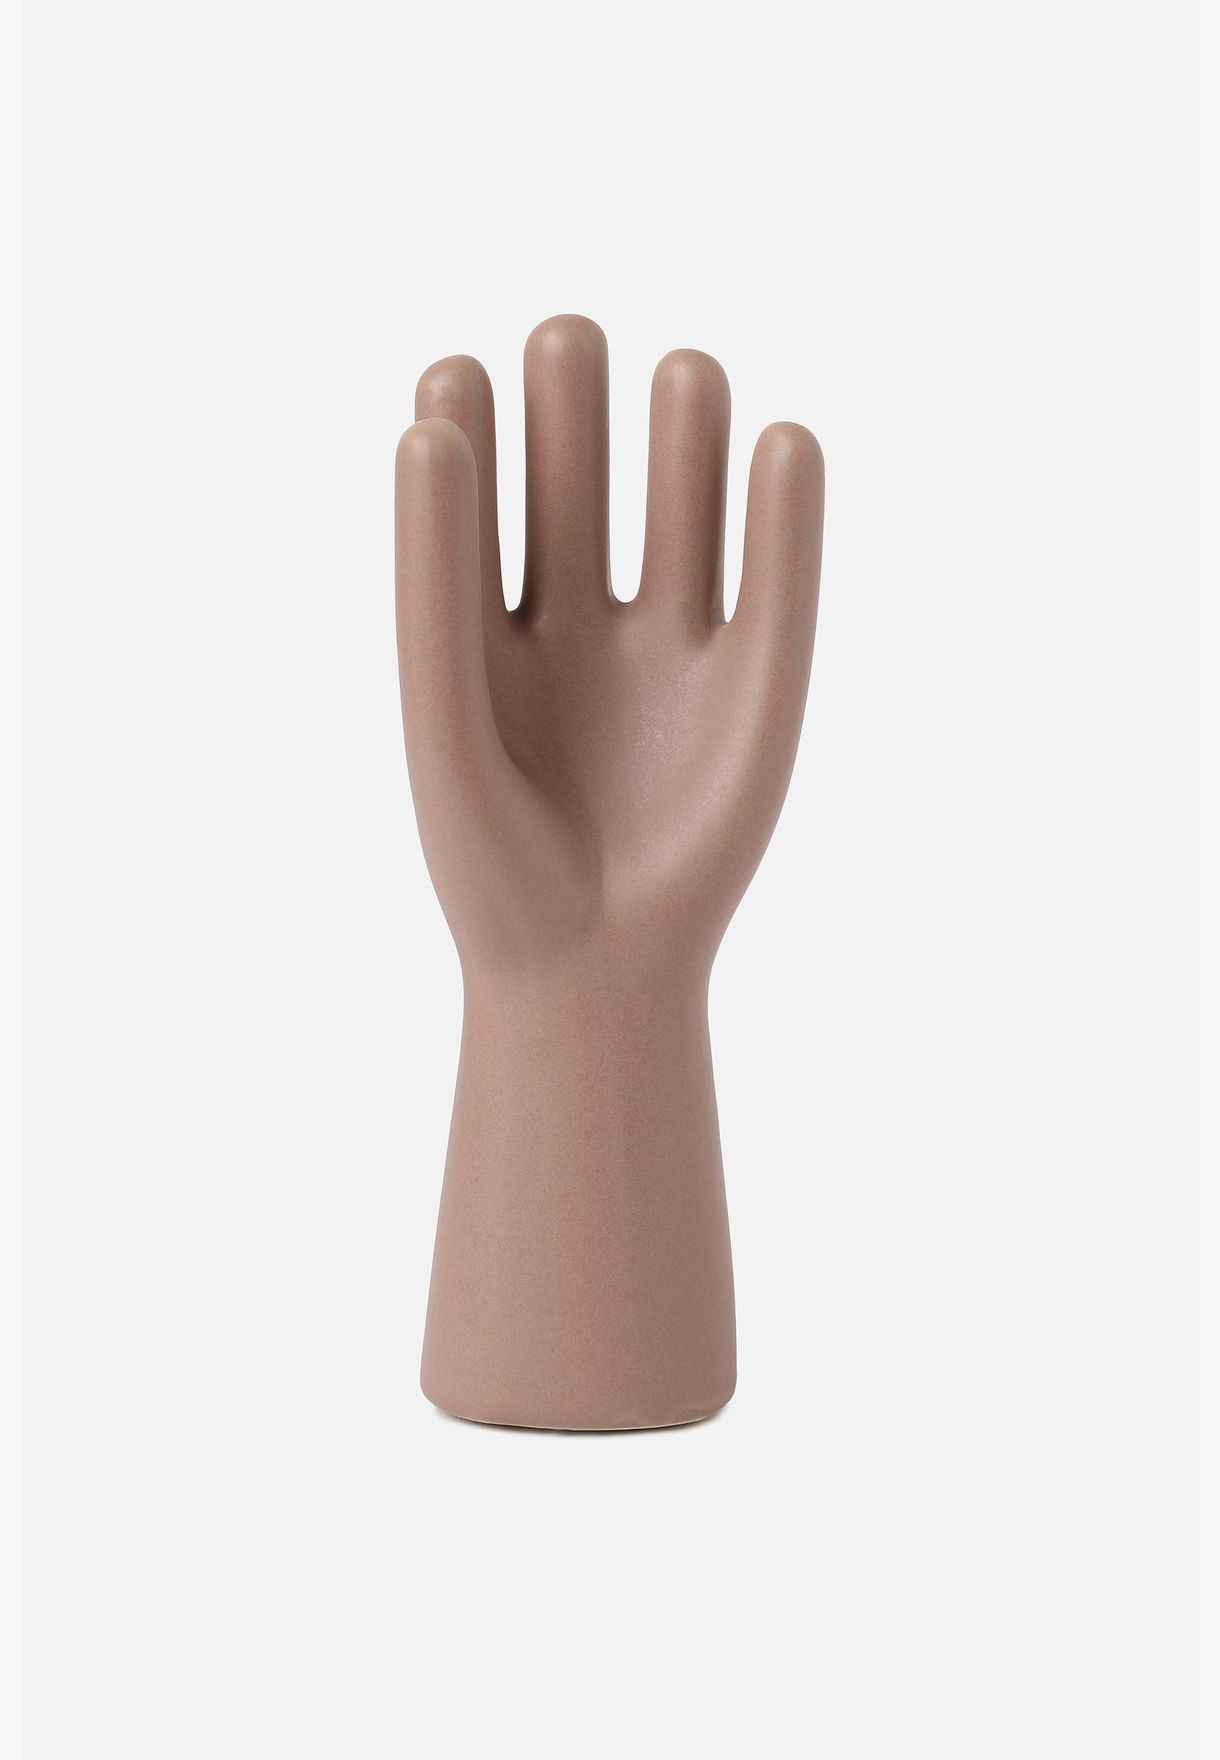 Hand Shaped Solid Modern Ceramic Showpiece For Home Decor 